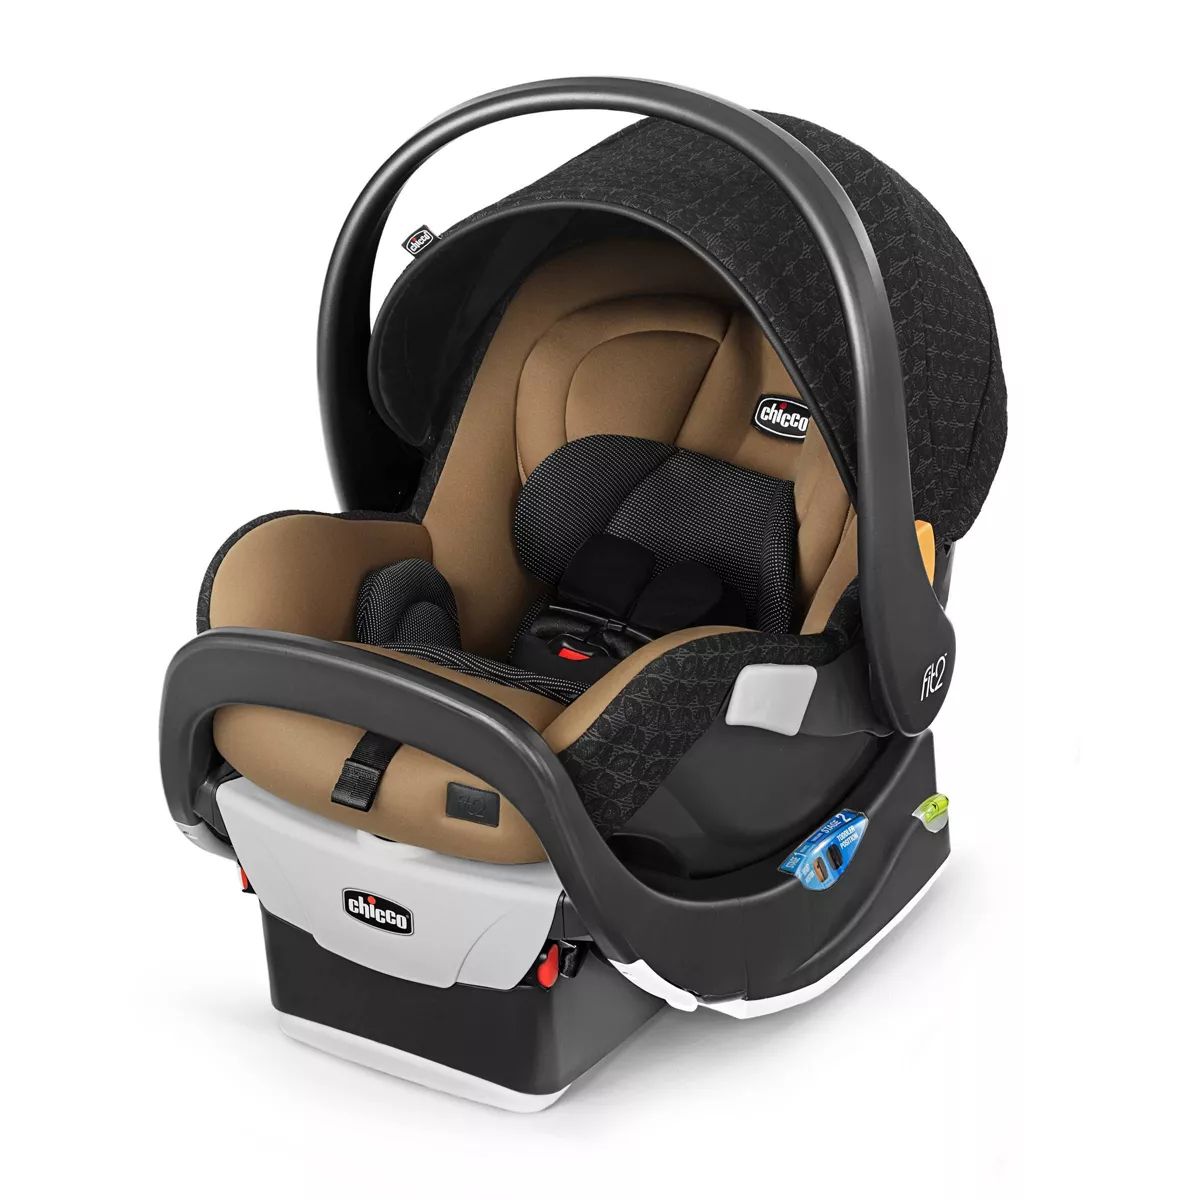 Chicco Fit2 Infant & Toddler Car Seat | Target